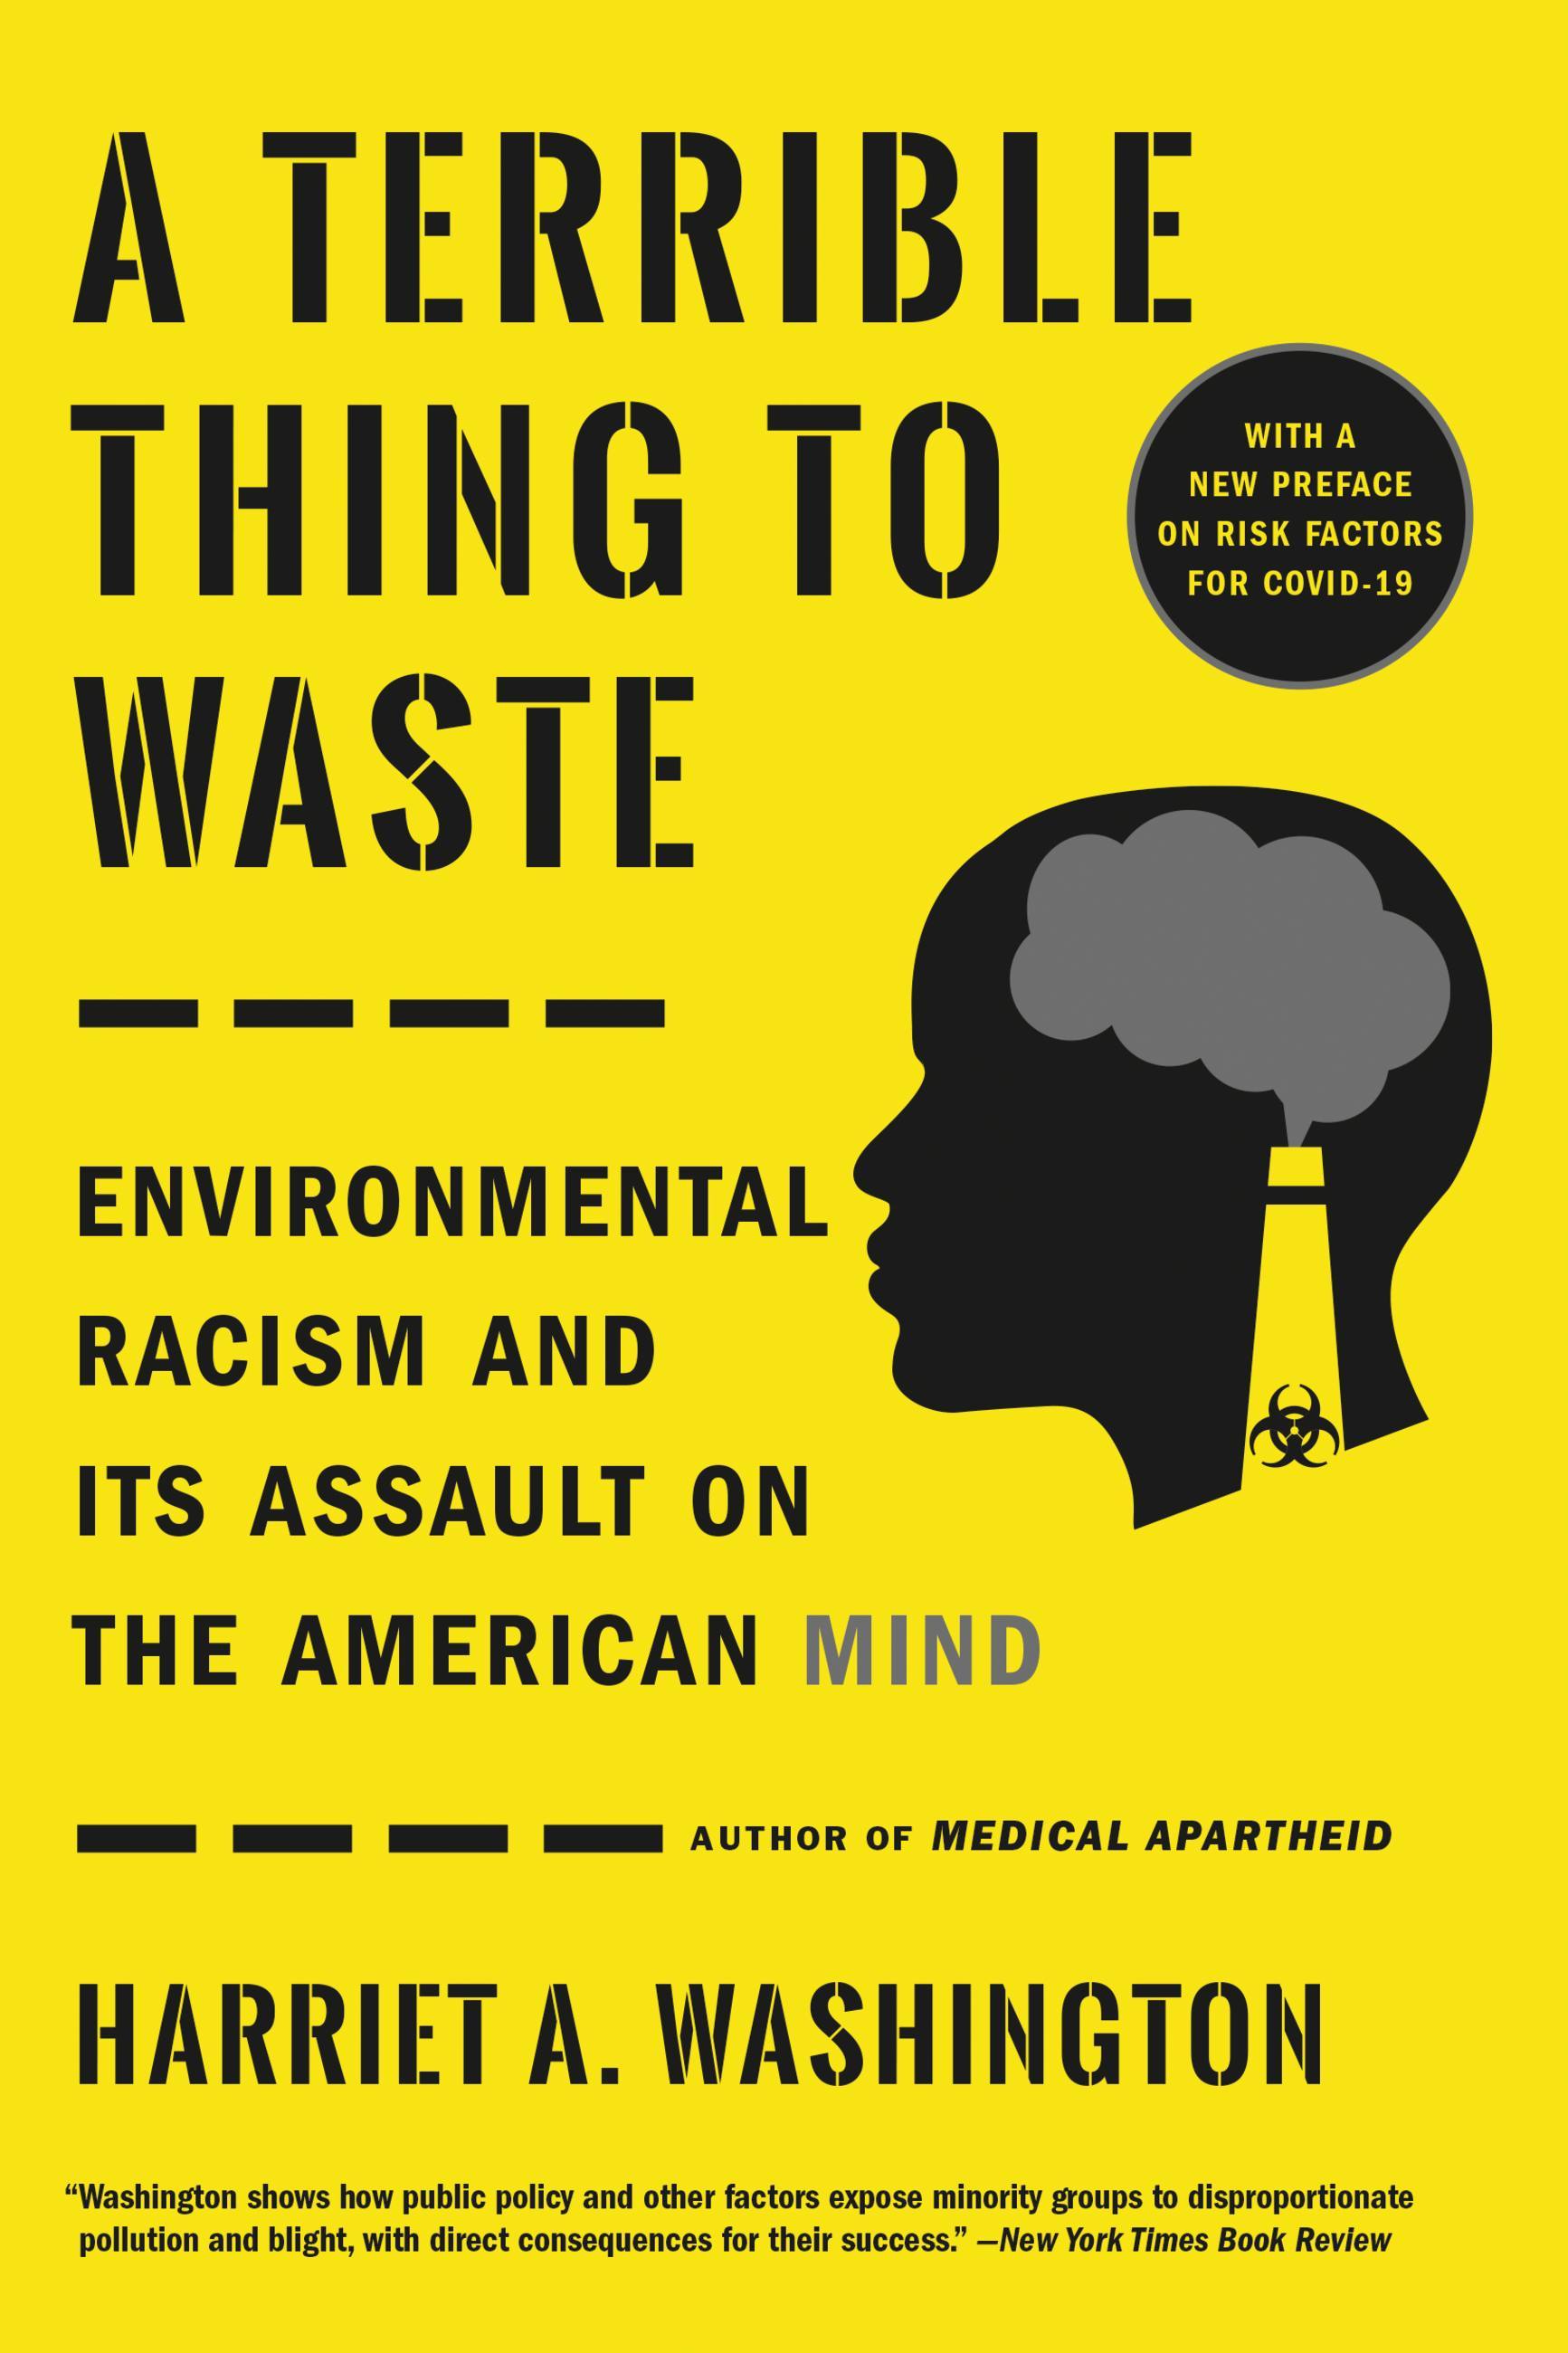 Harriet Washington - A Terrible Thing to Waste: Environmental Racism and its Assault on the American Mind